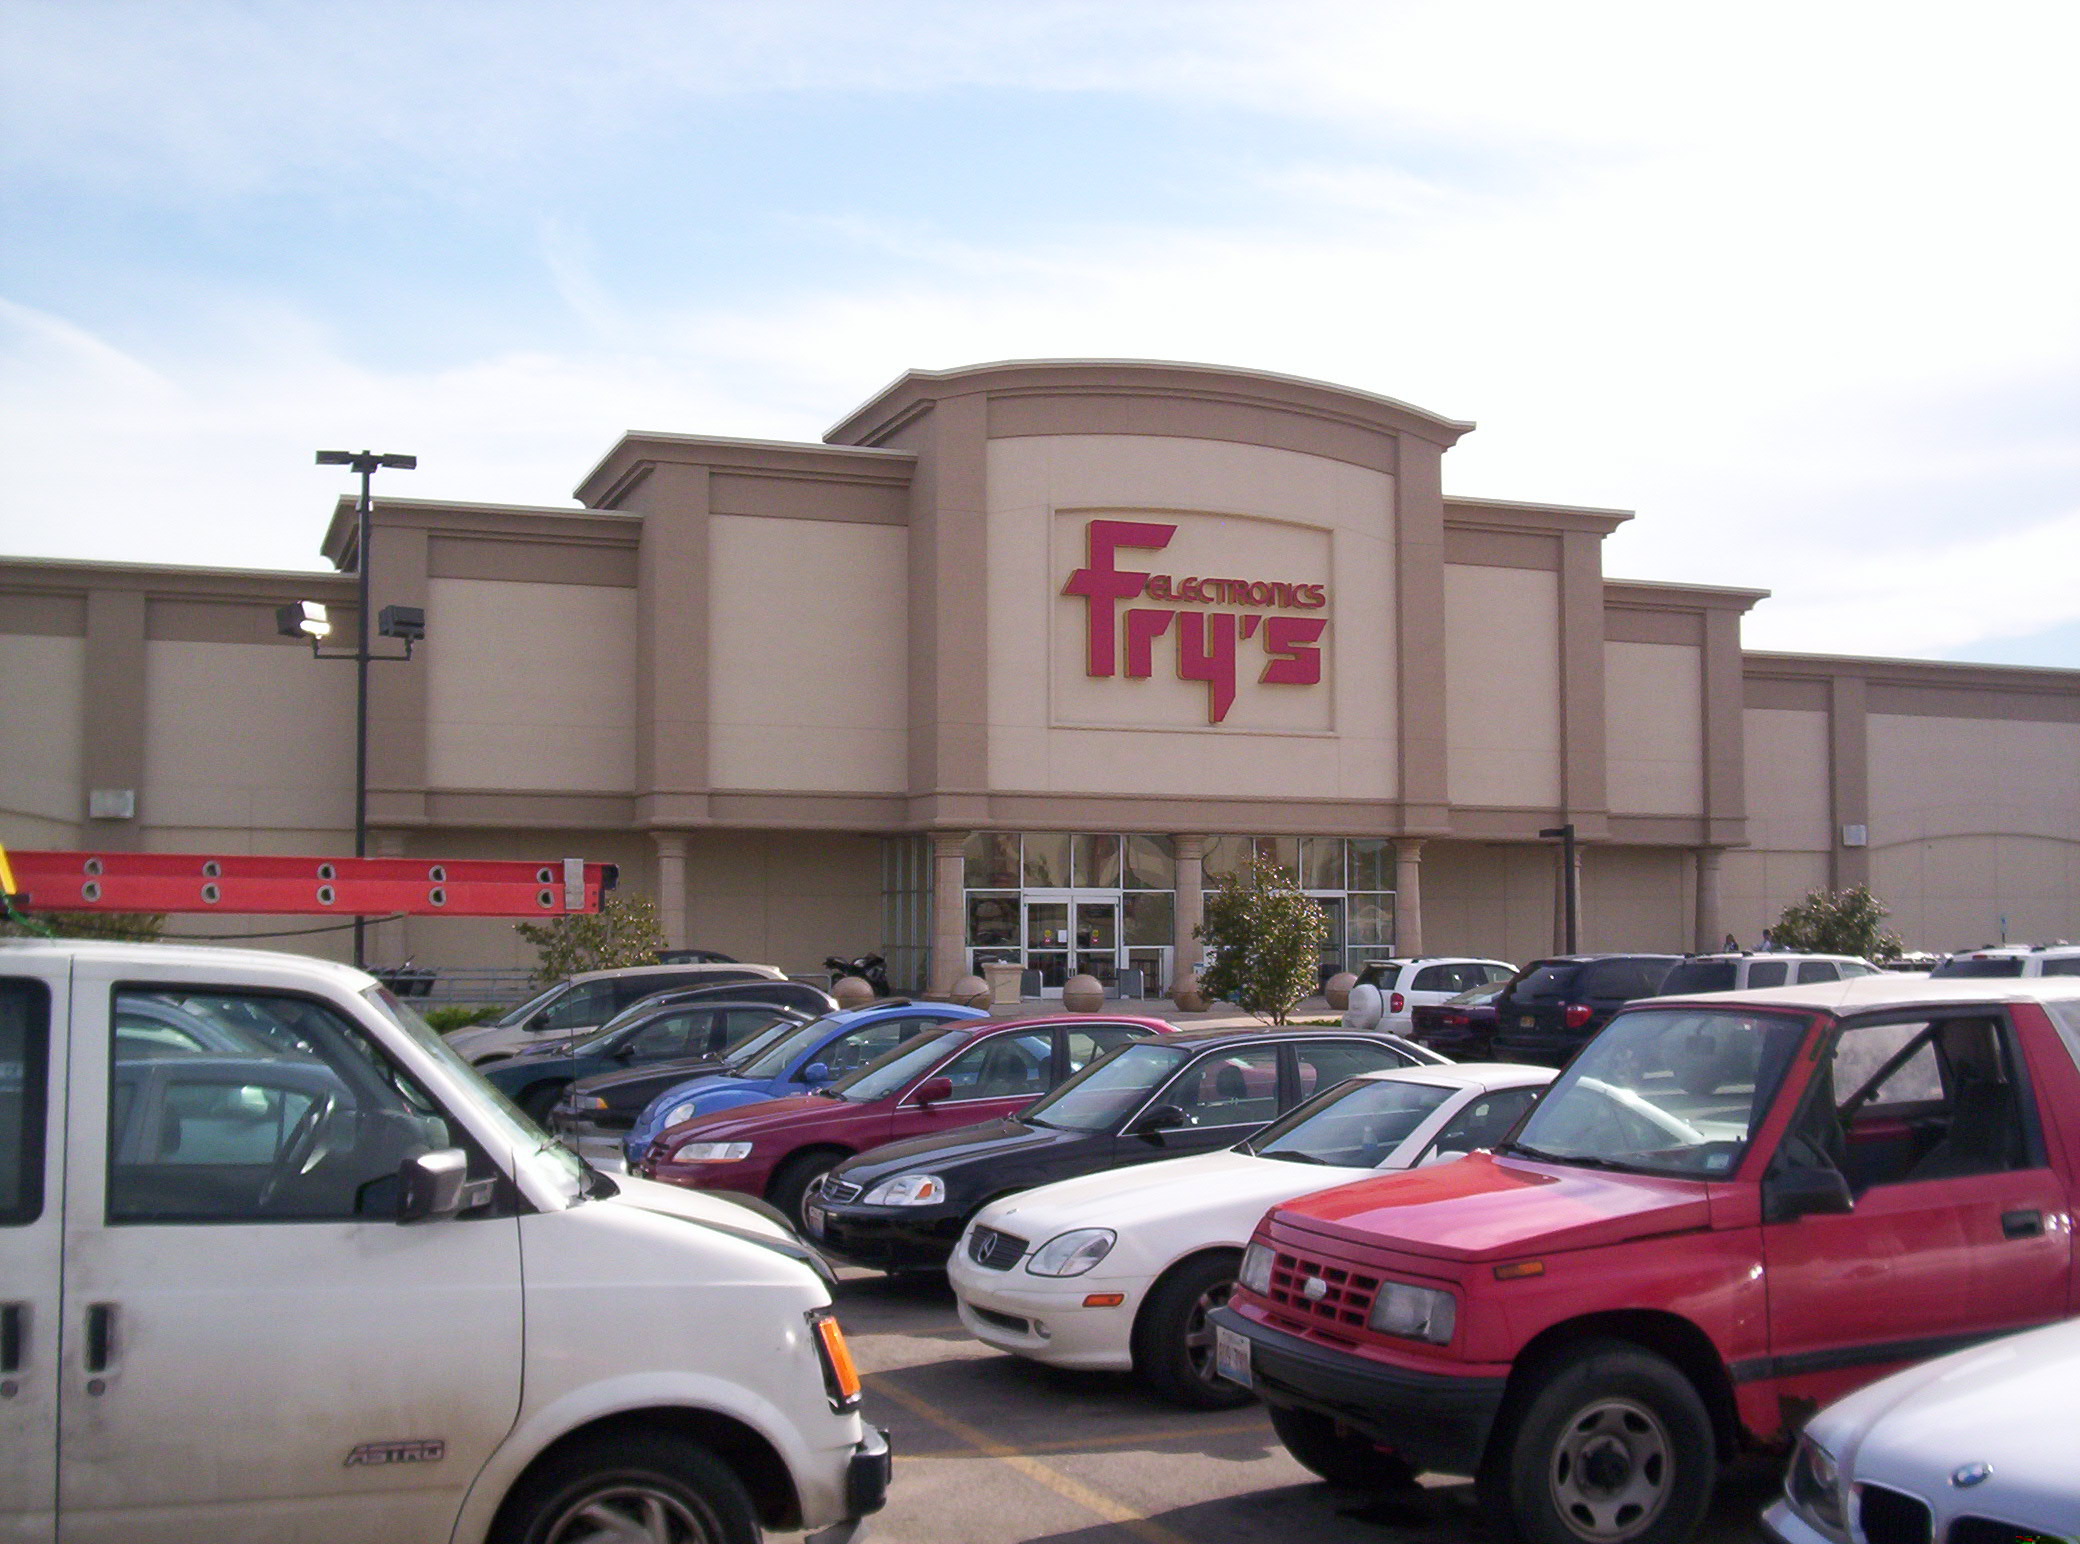 A Fry's store entrance in Illinois